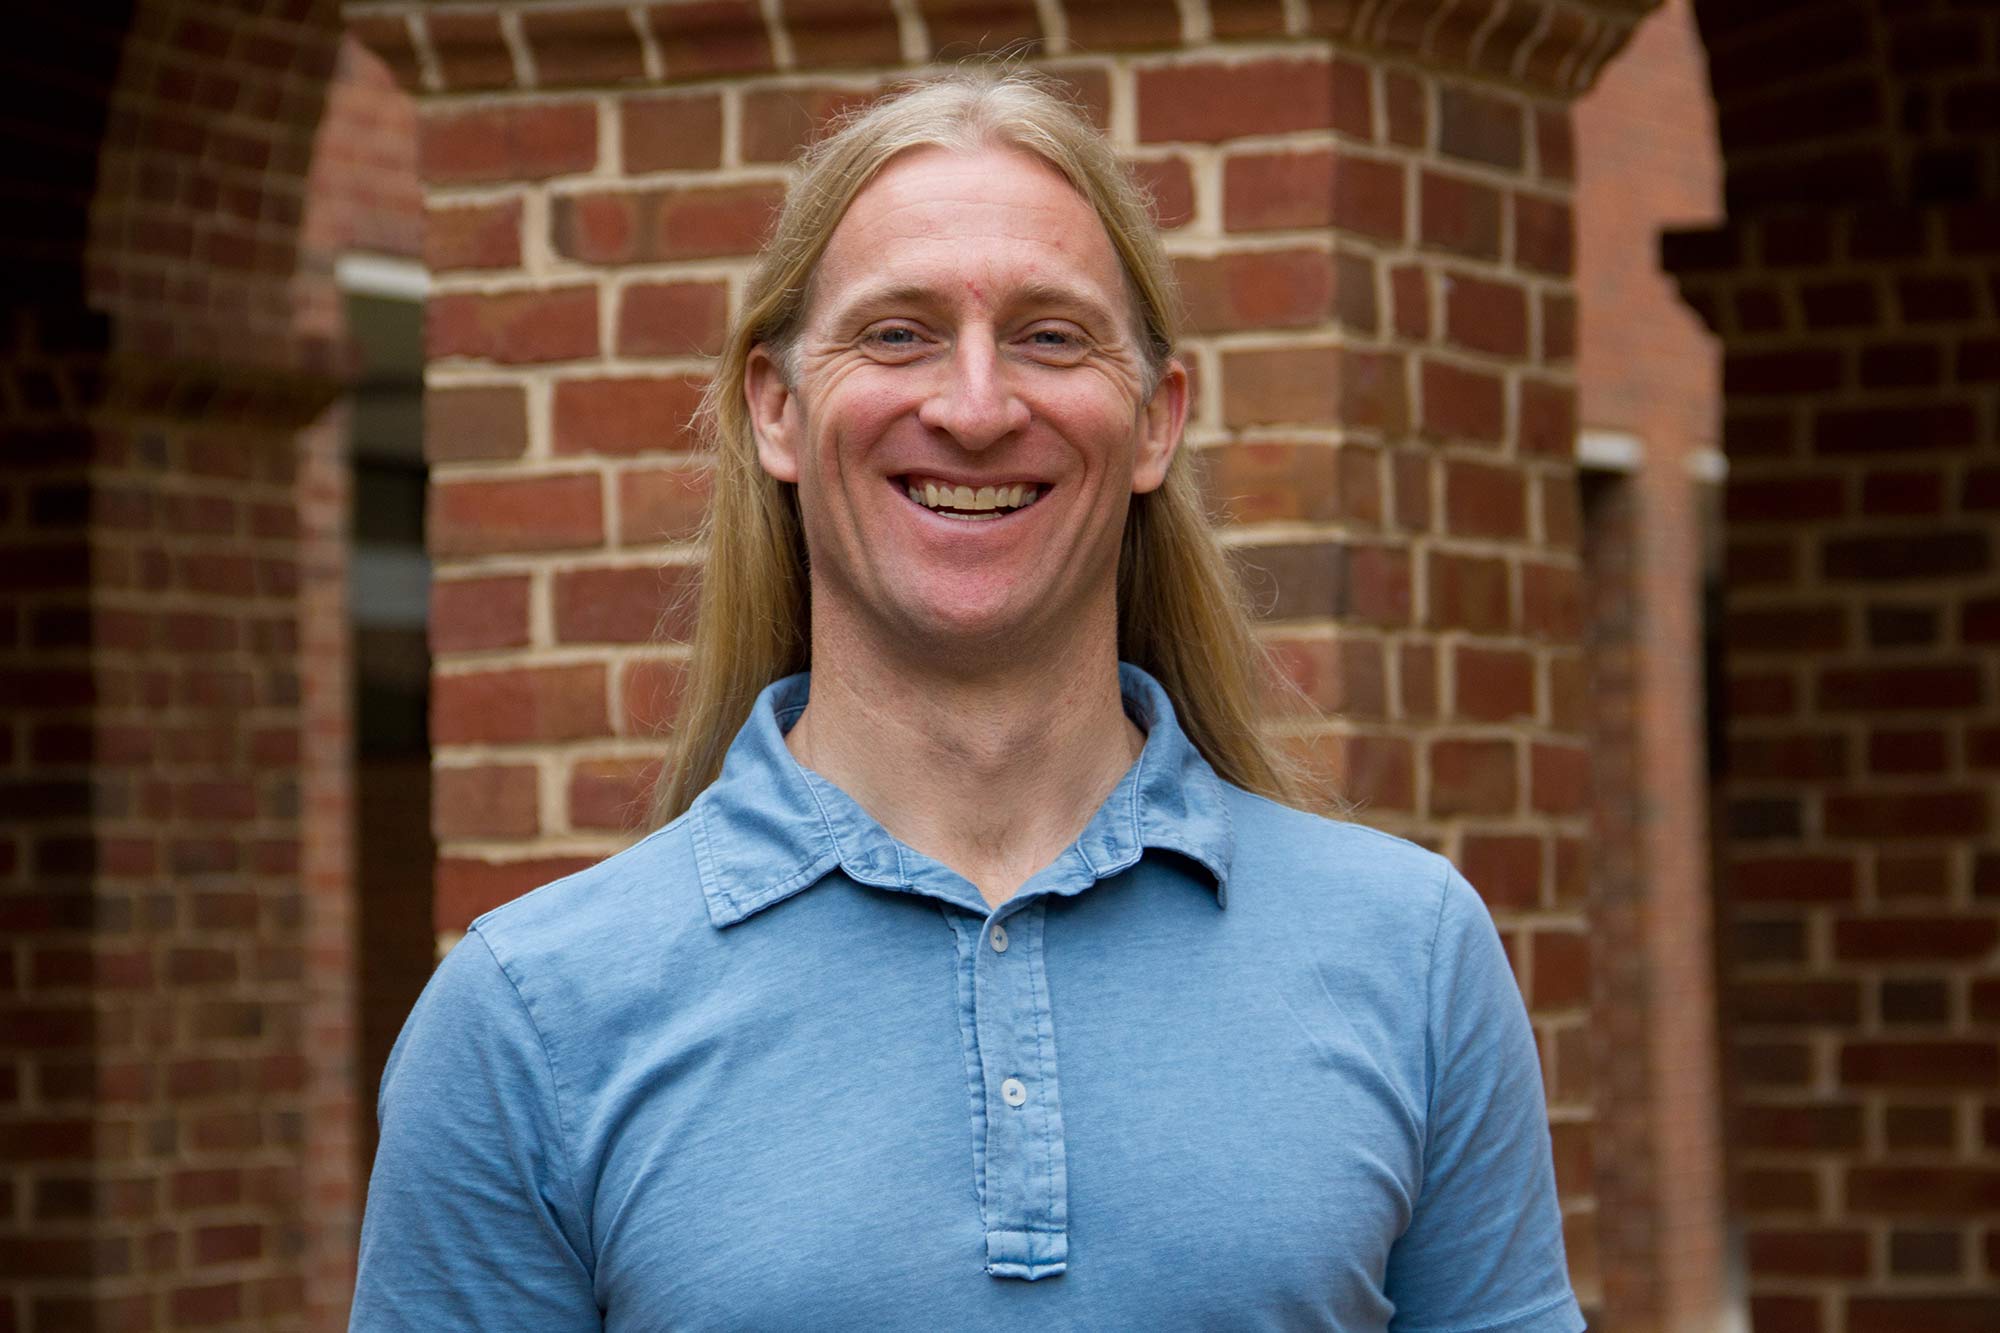 Chris Hulleman, a research associate professor at UVA’s Curry School of Education, was a lead researcher of the study.